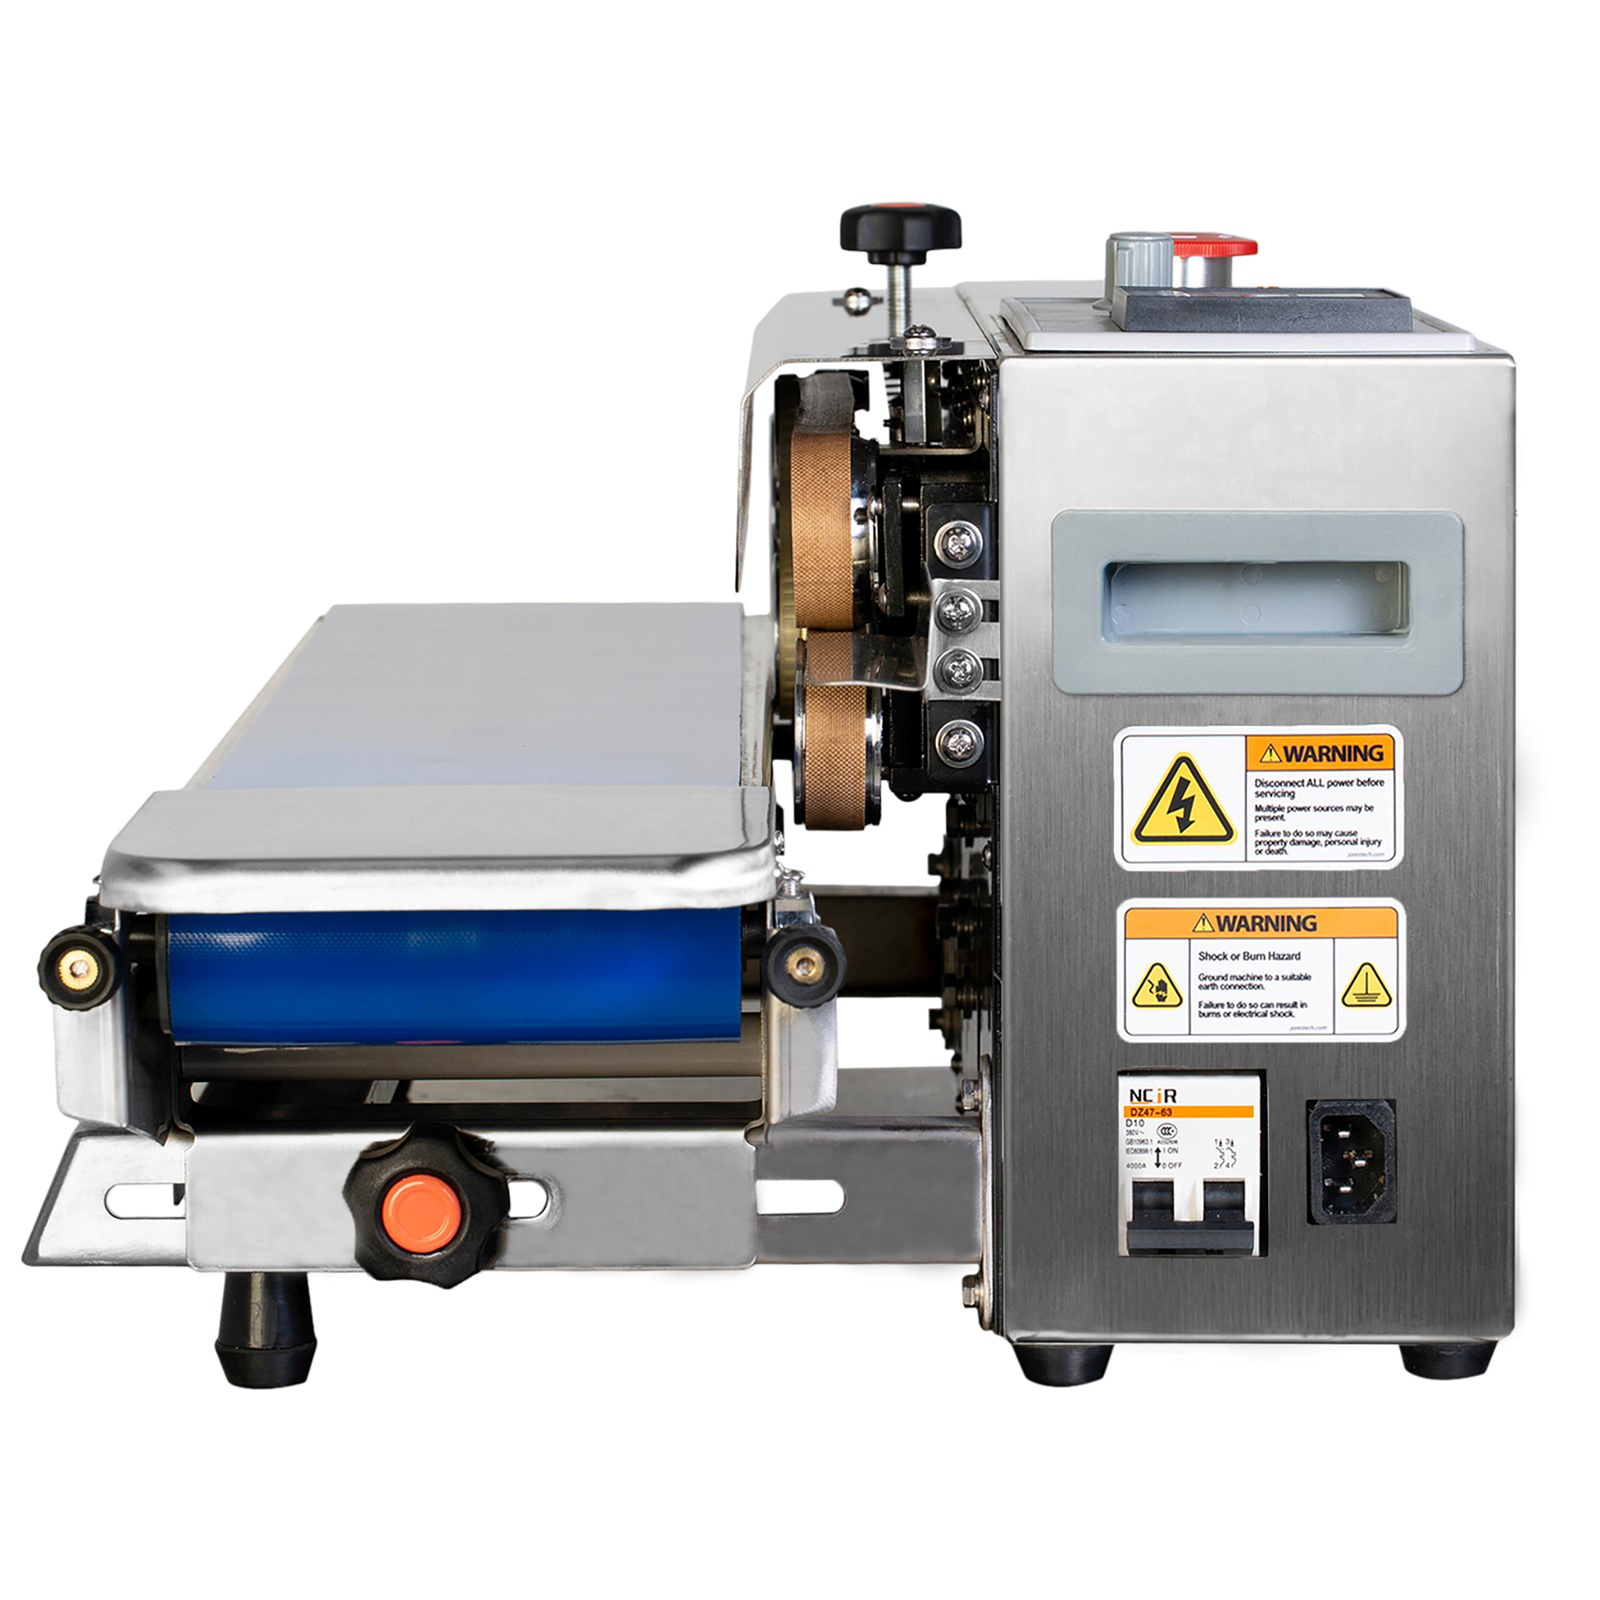 side view of stainless steel JORESTECH continuous band sealer and the heating element that seals the bags. Bag sealer is set for horizontal applications. 